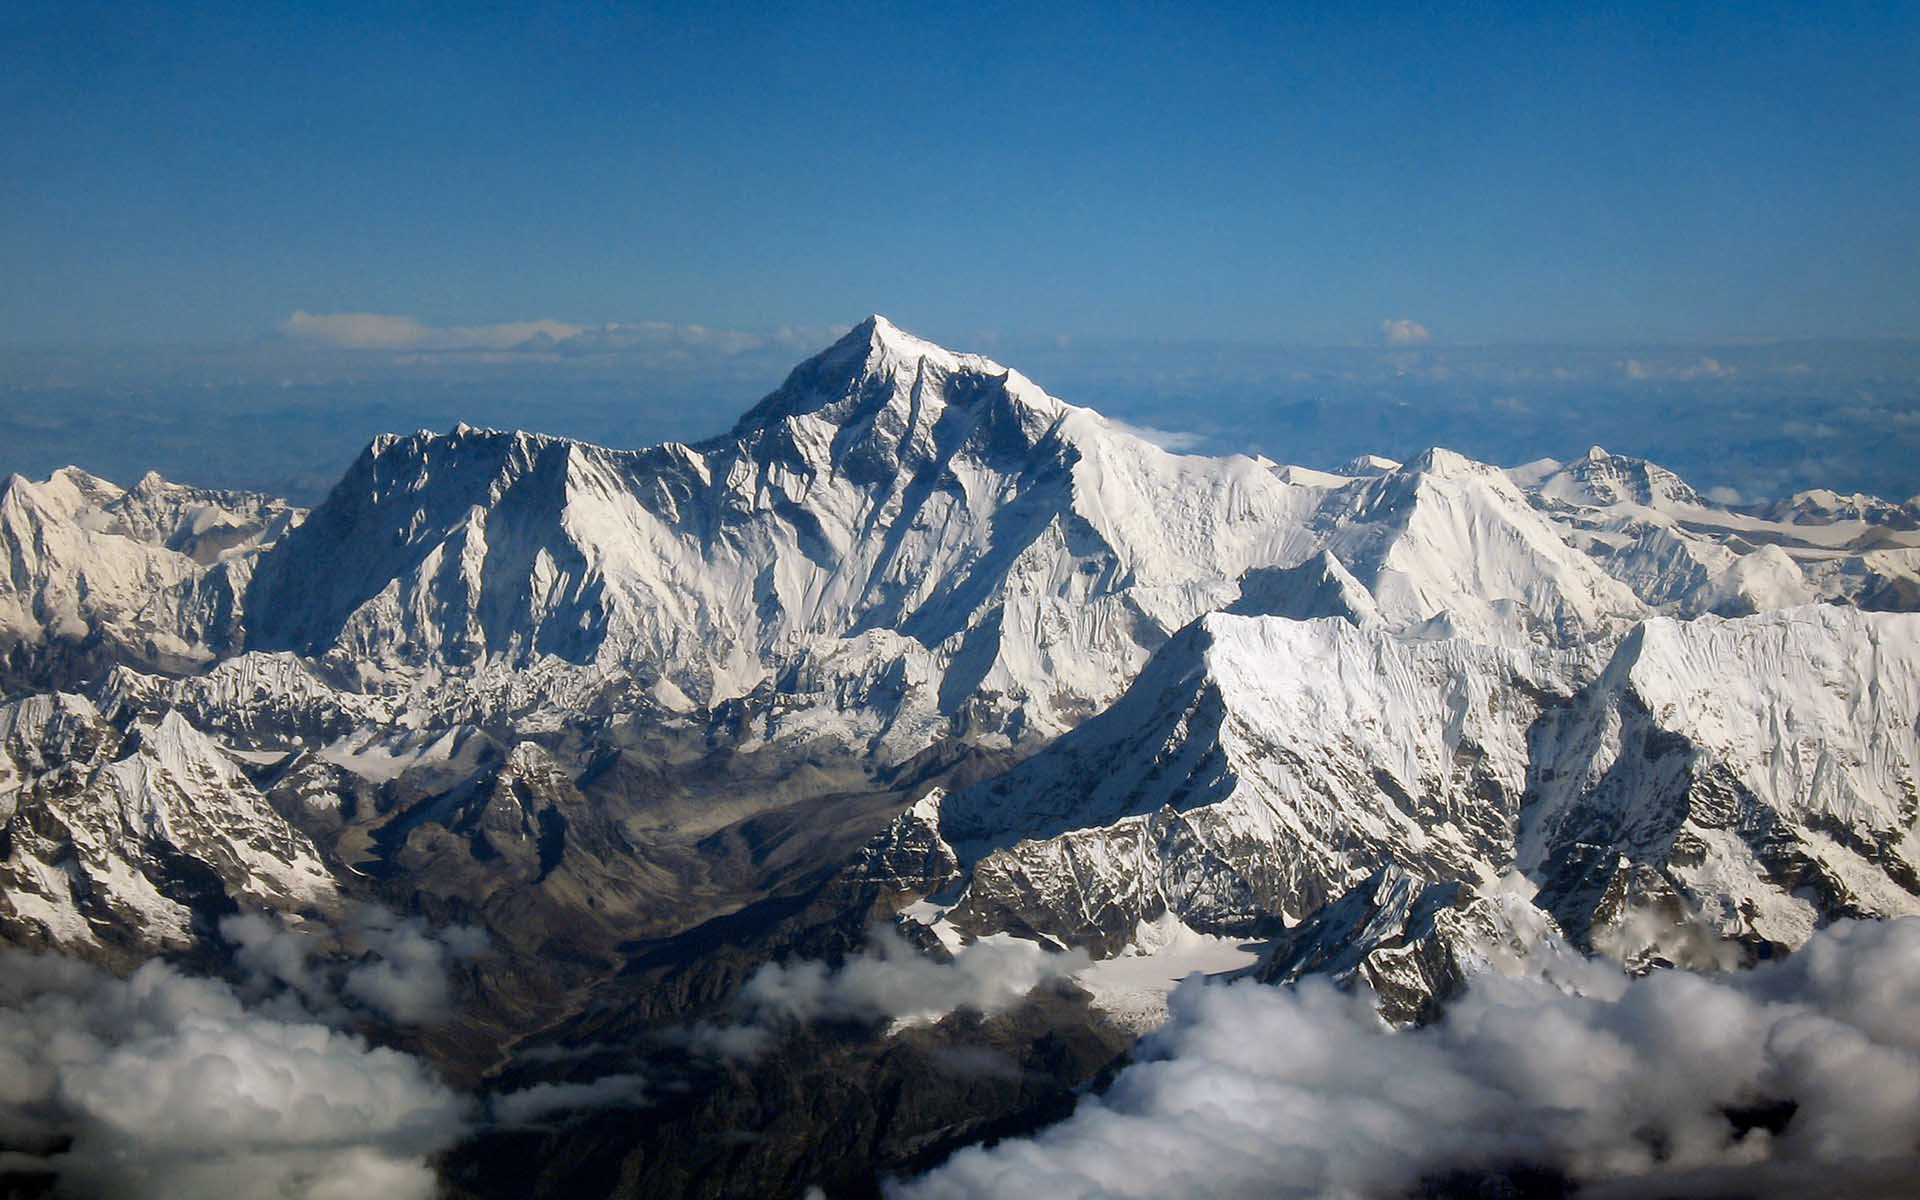 No One to Blame for ASKfm's Tragic Mt. Everest Expedition